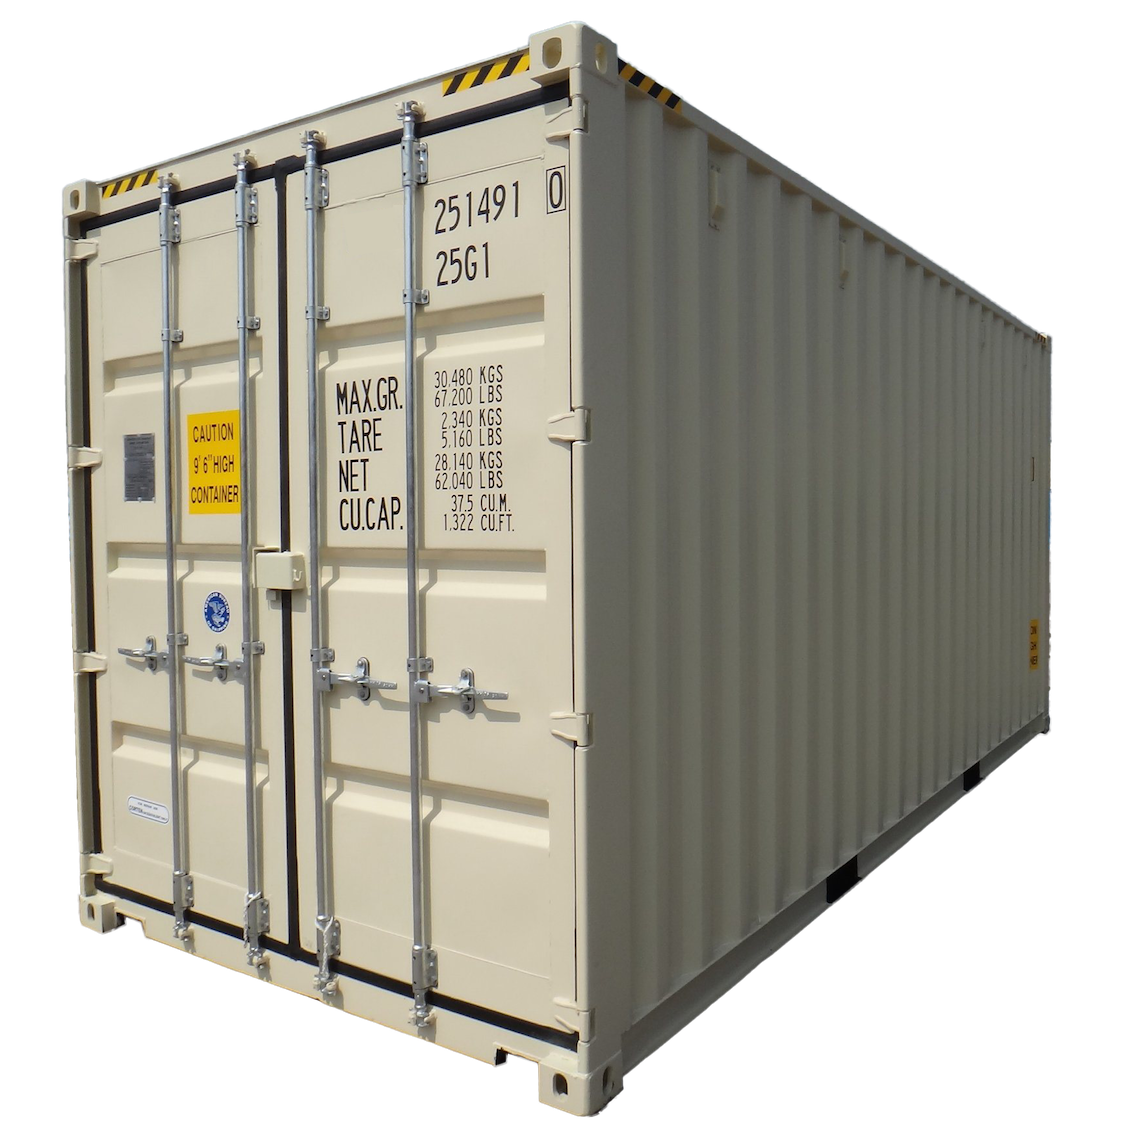 https://www.conexdepot.com/wp-content/uploads/2019/08/20FT-High-Cube-NEW-One-Trip-Shipping-Container-1.png